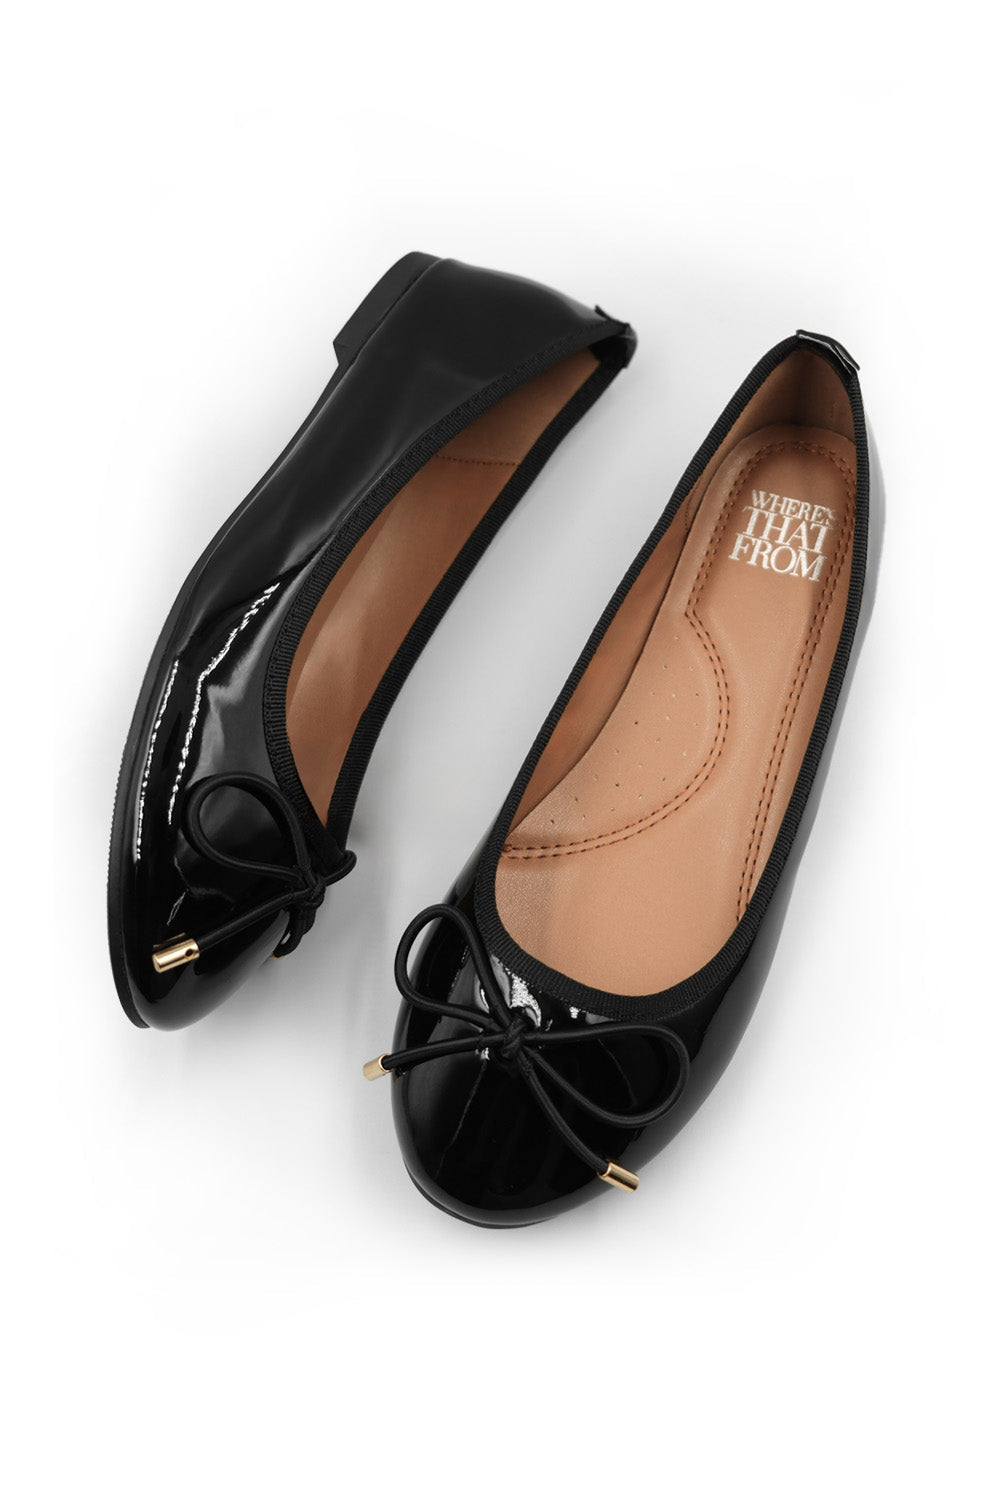 BEXLEY SLIP ON FLAT PUMPS IN BLACK PATENT FAUX LEATHER